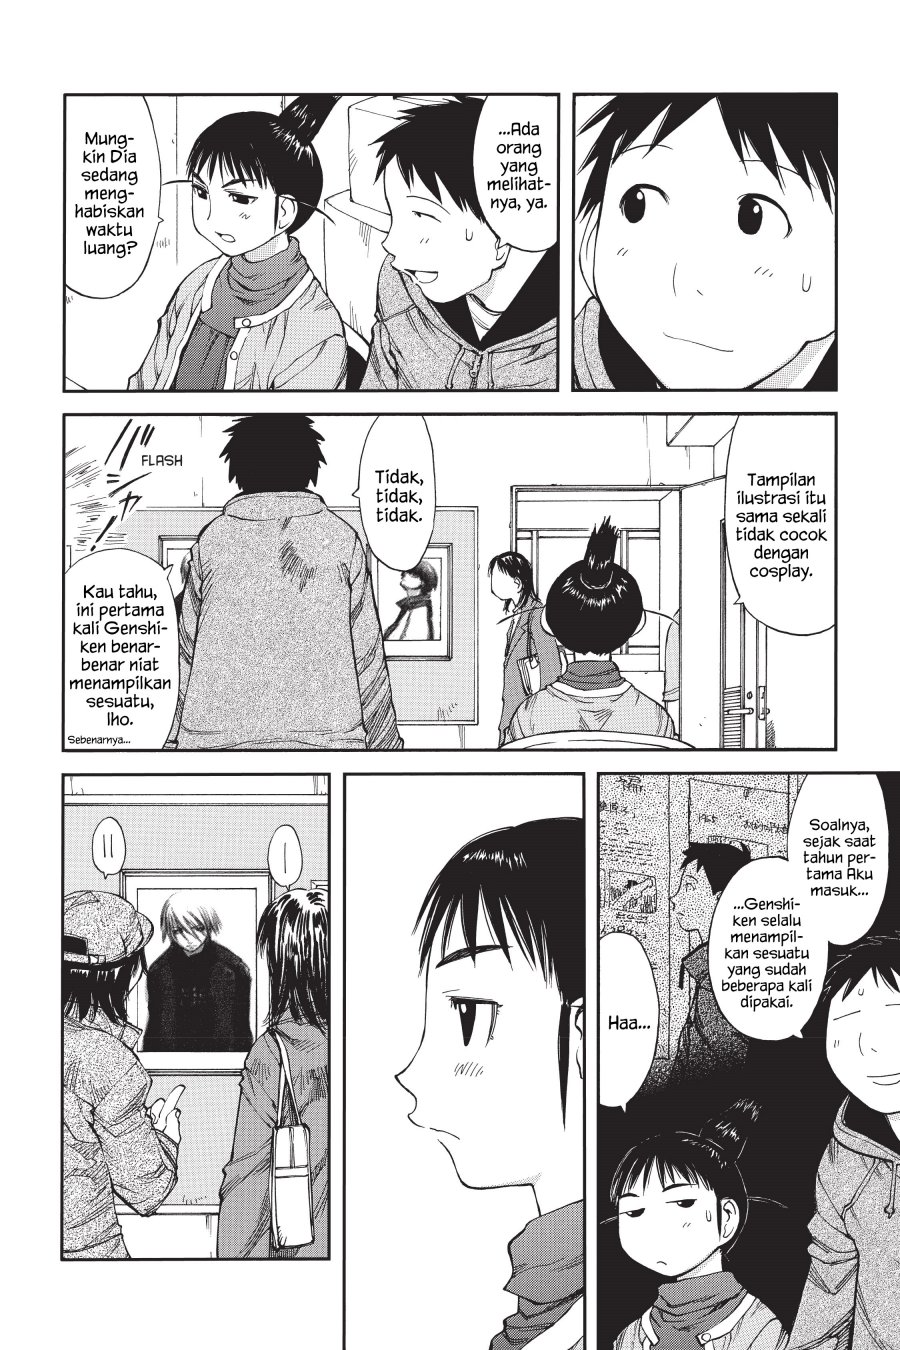 Genshiken – The Society for the Study of Modern Visual Culture Chapter 49 Image 4